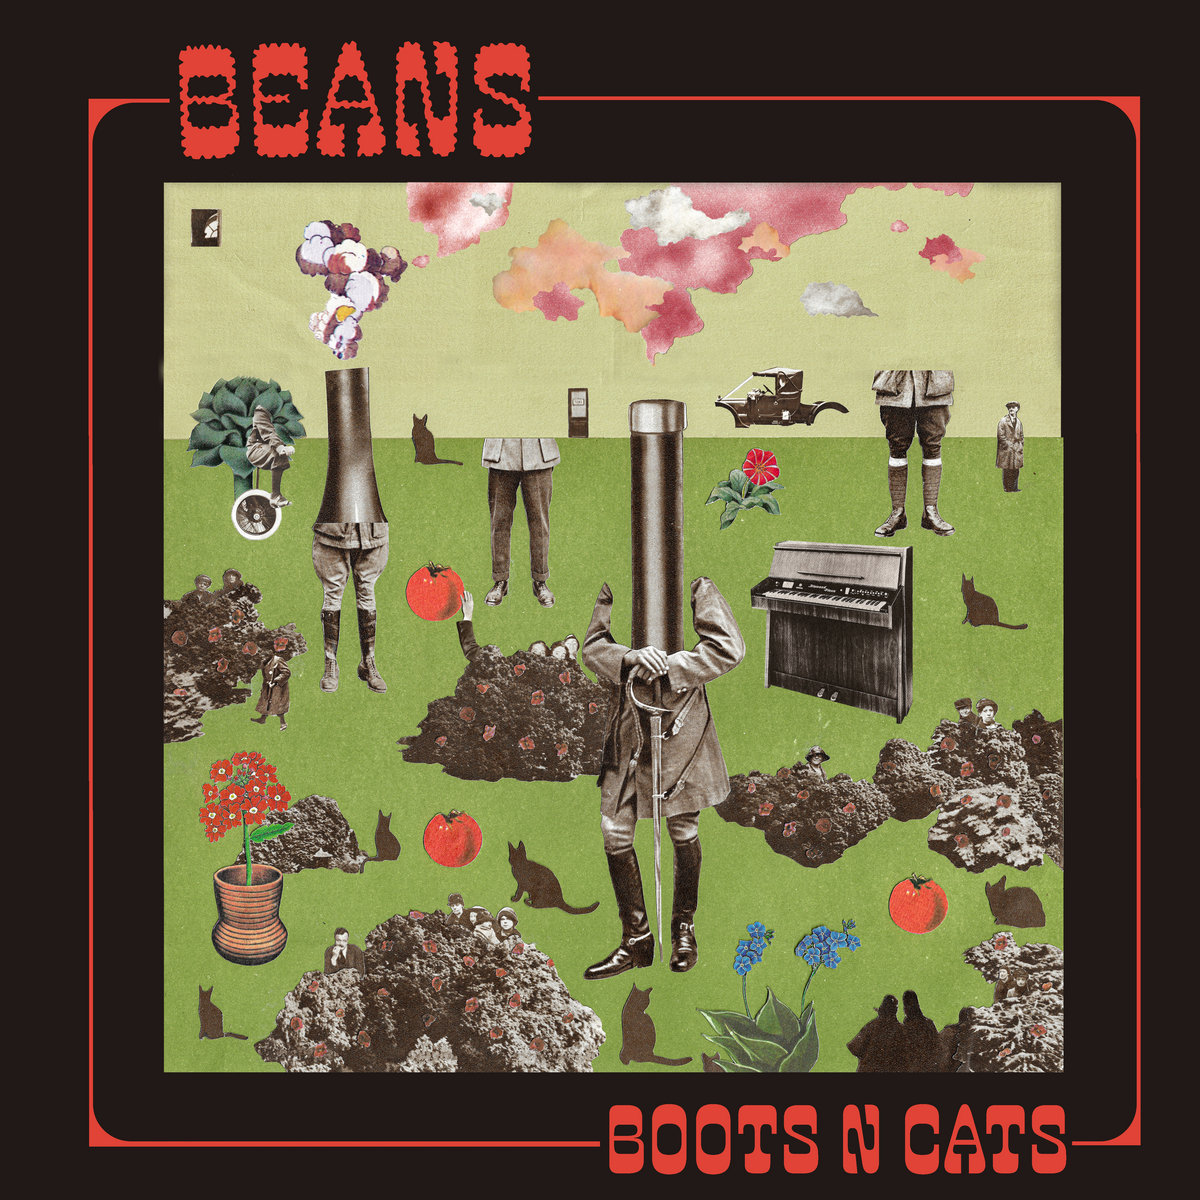 BEANS cover